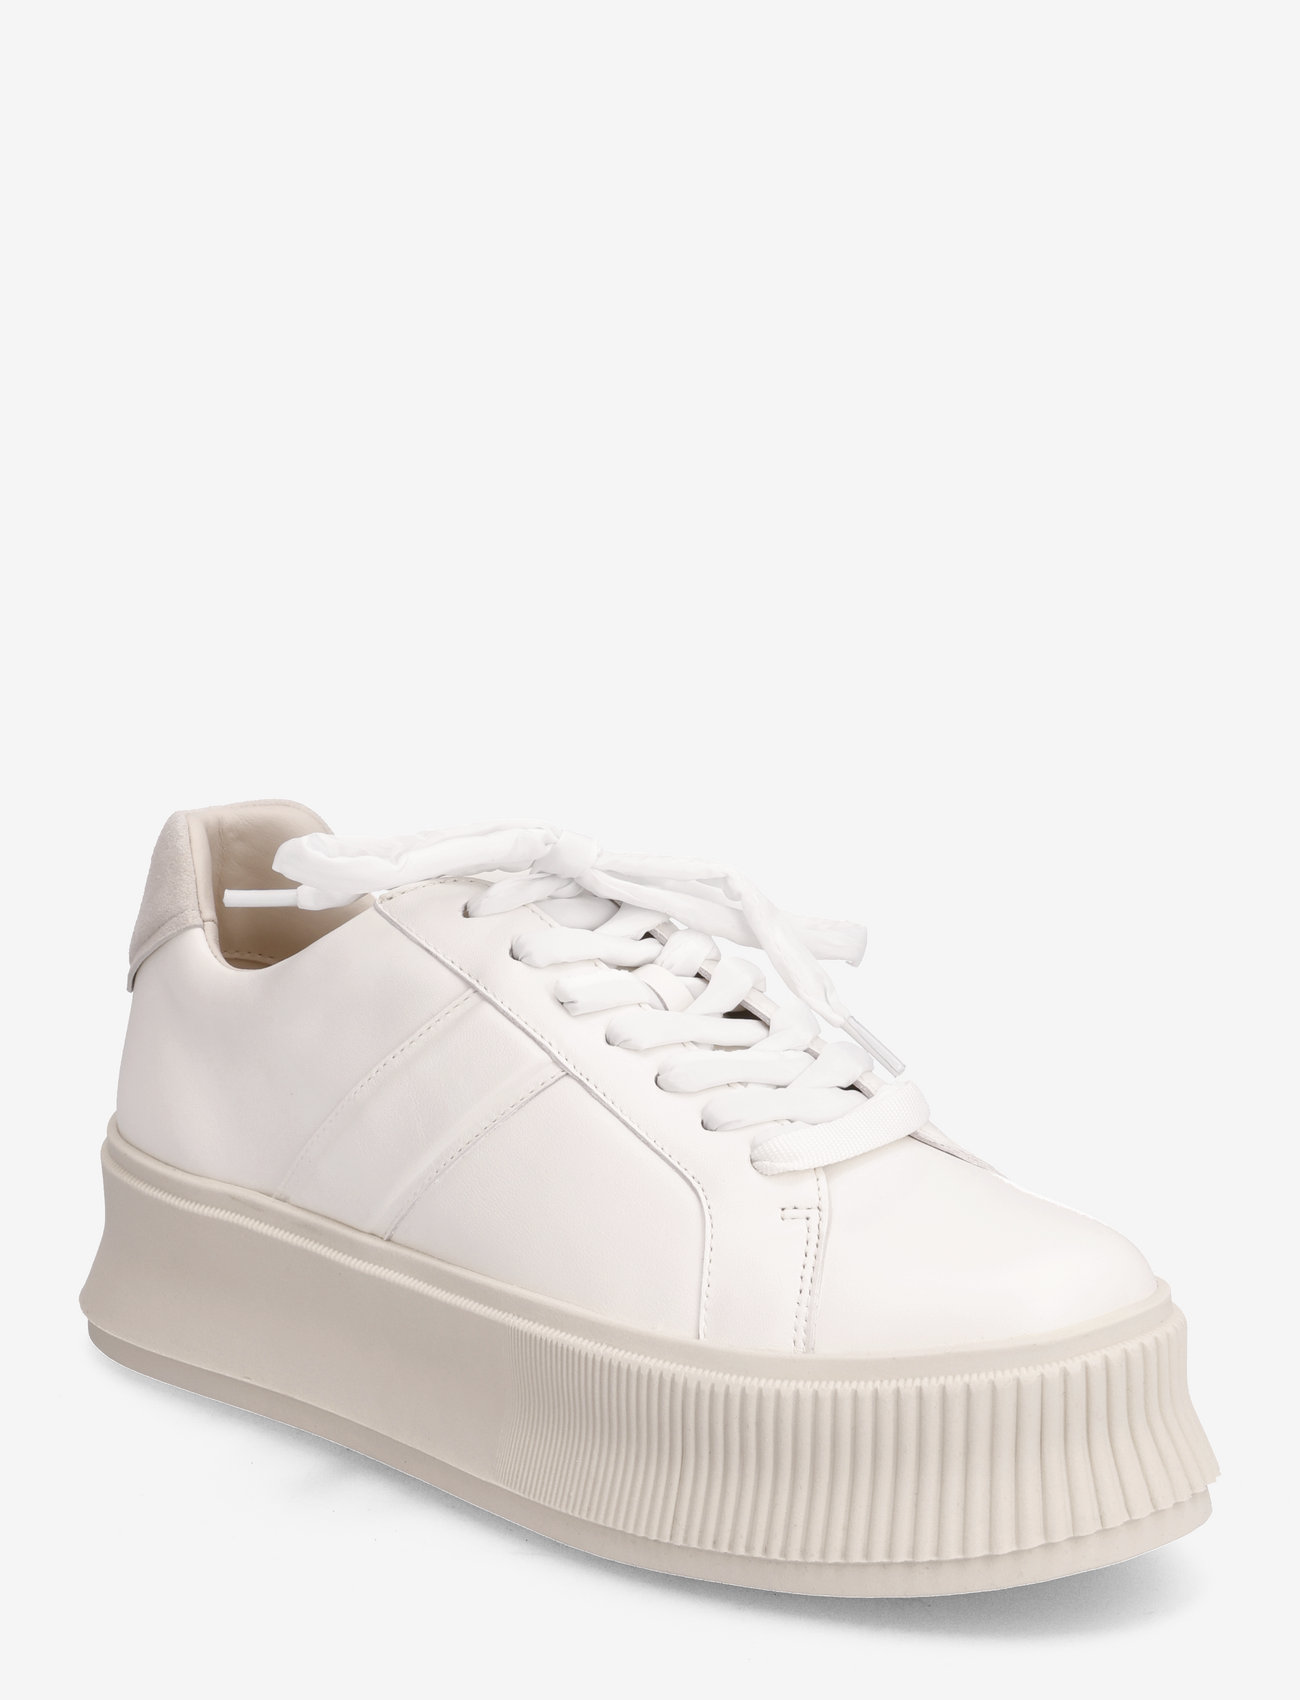 NEWD.Tamaris - Woms Lace-up - niedrige sneakers - white/cream - 0